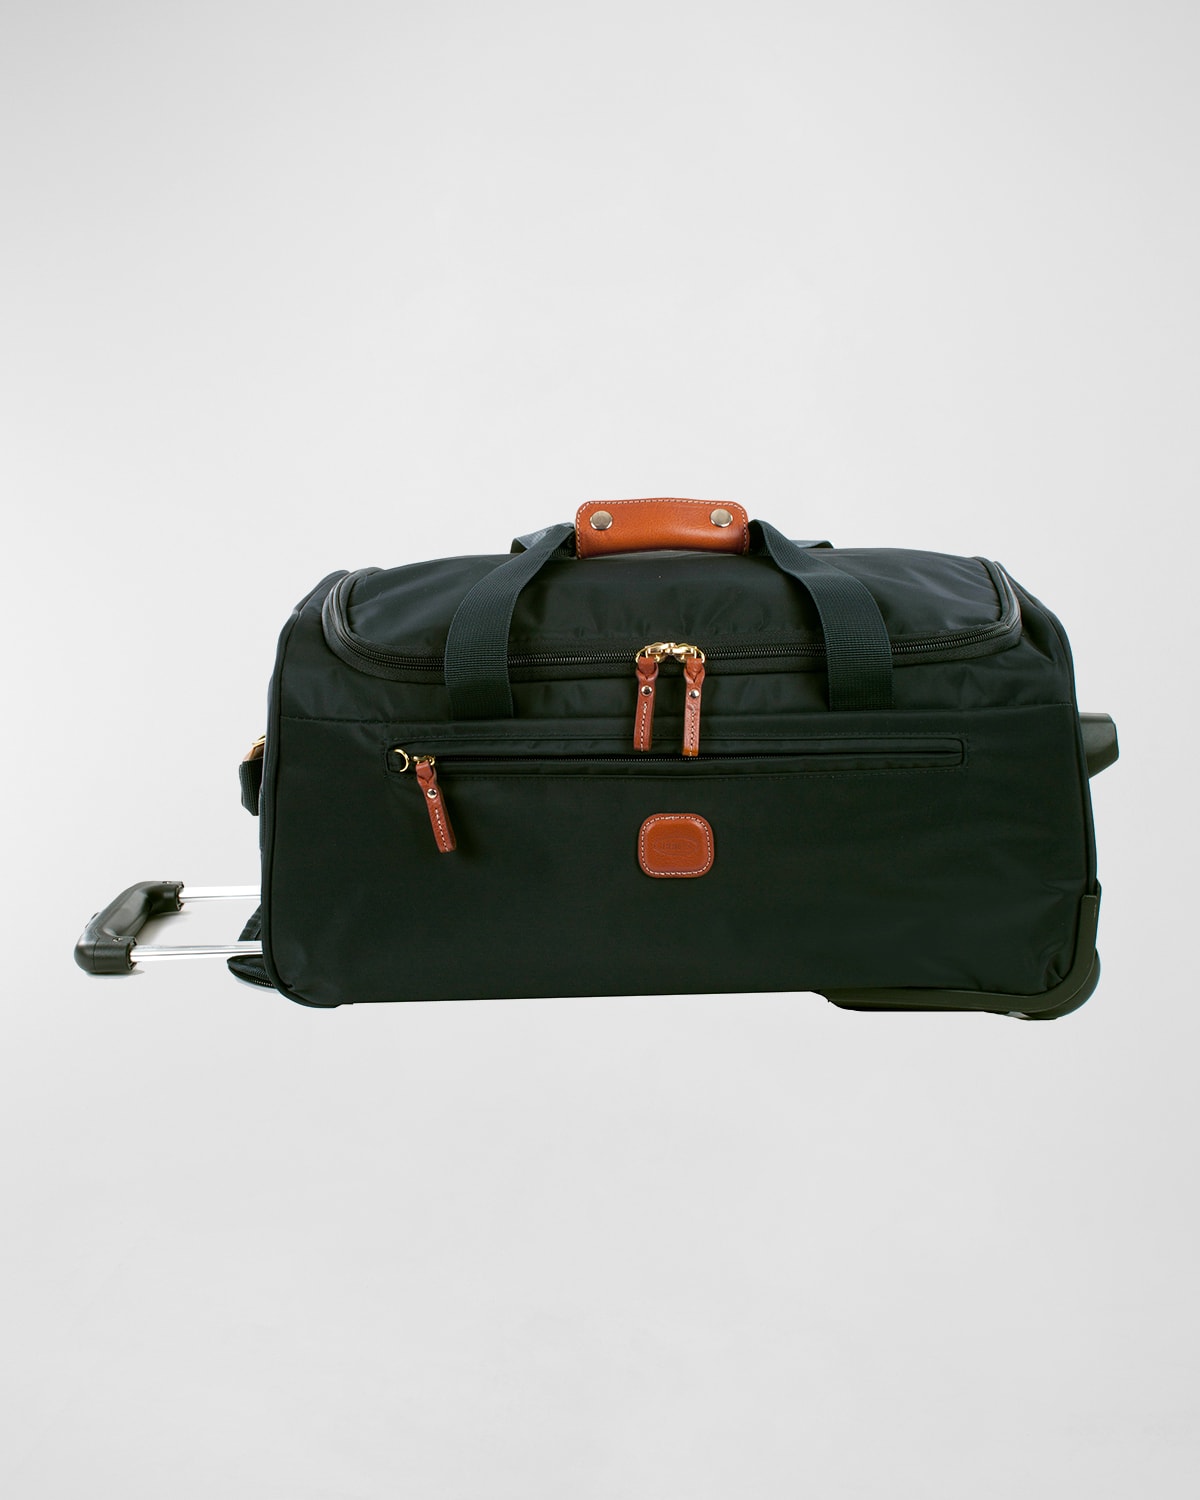 Olive X-Bag 21" Carry-On Rolling Duffel Luggage